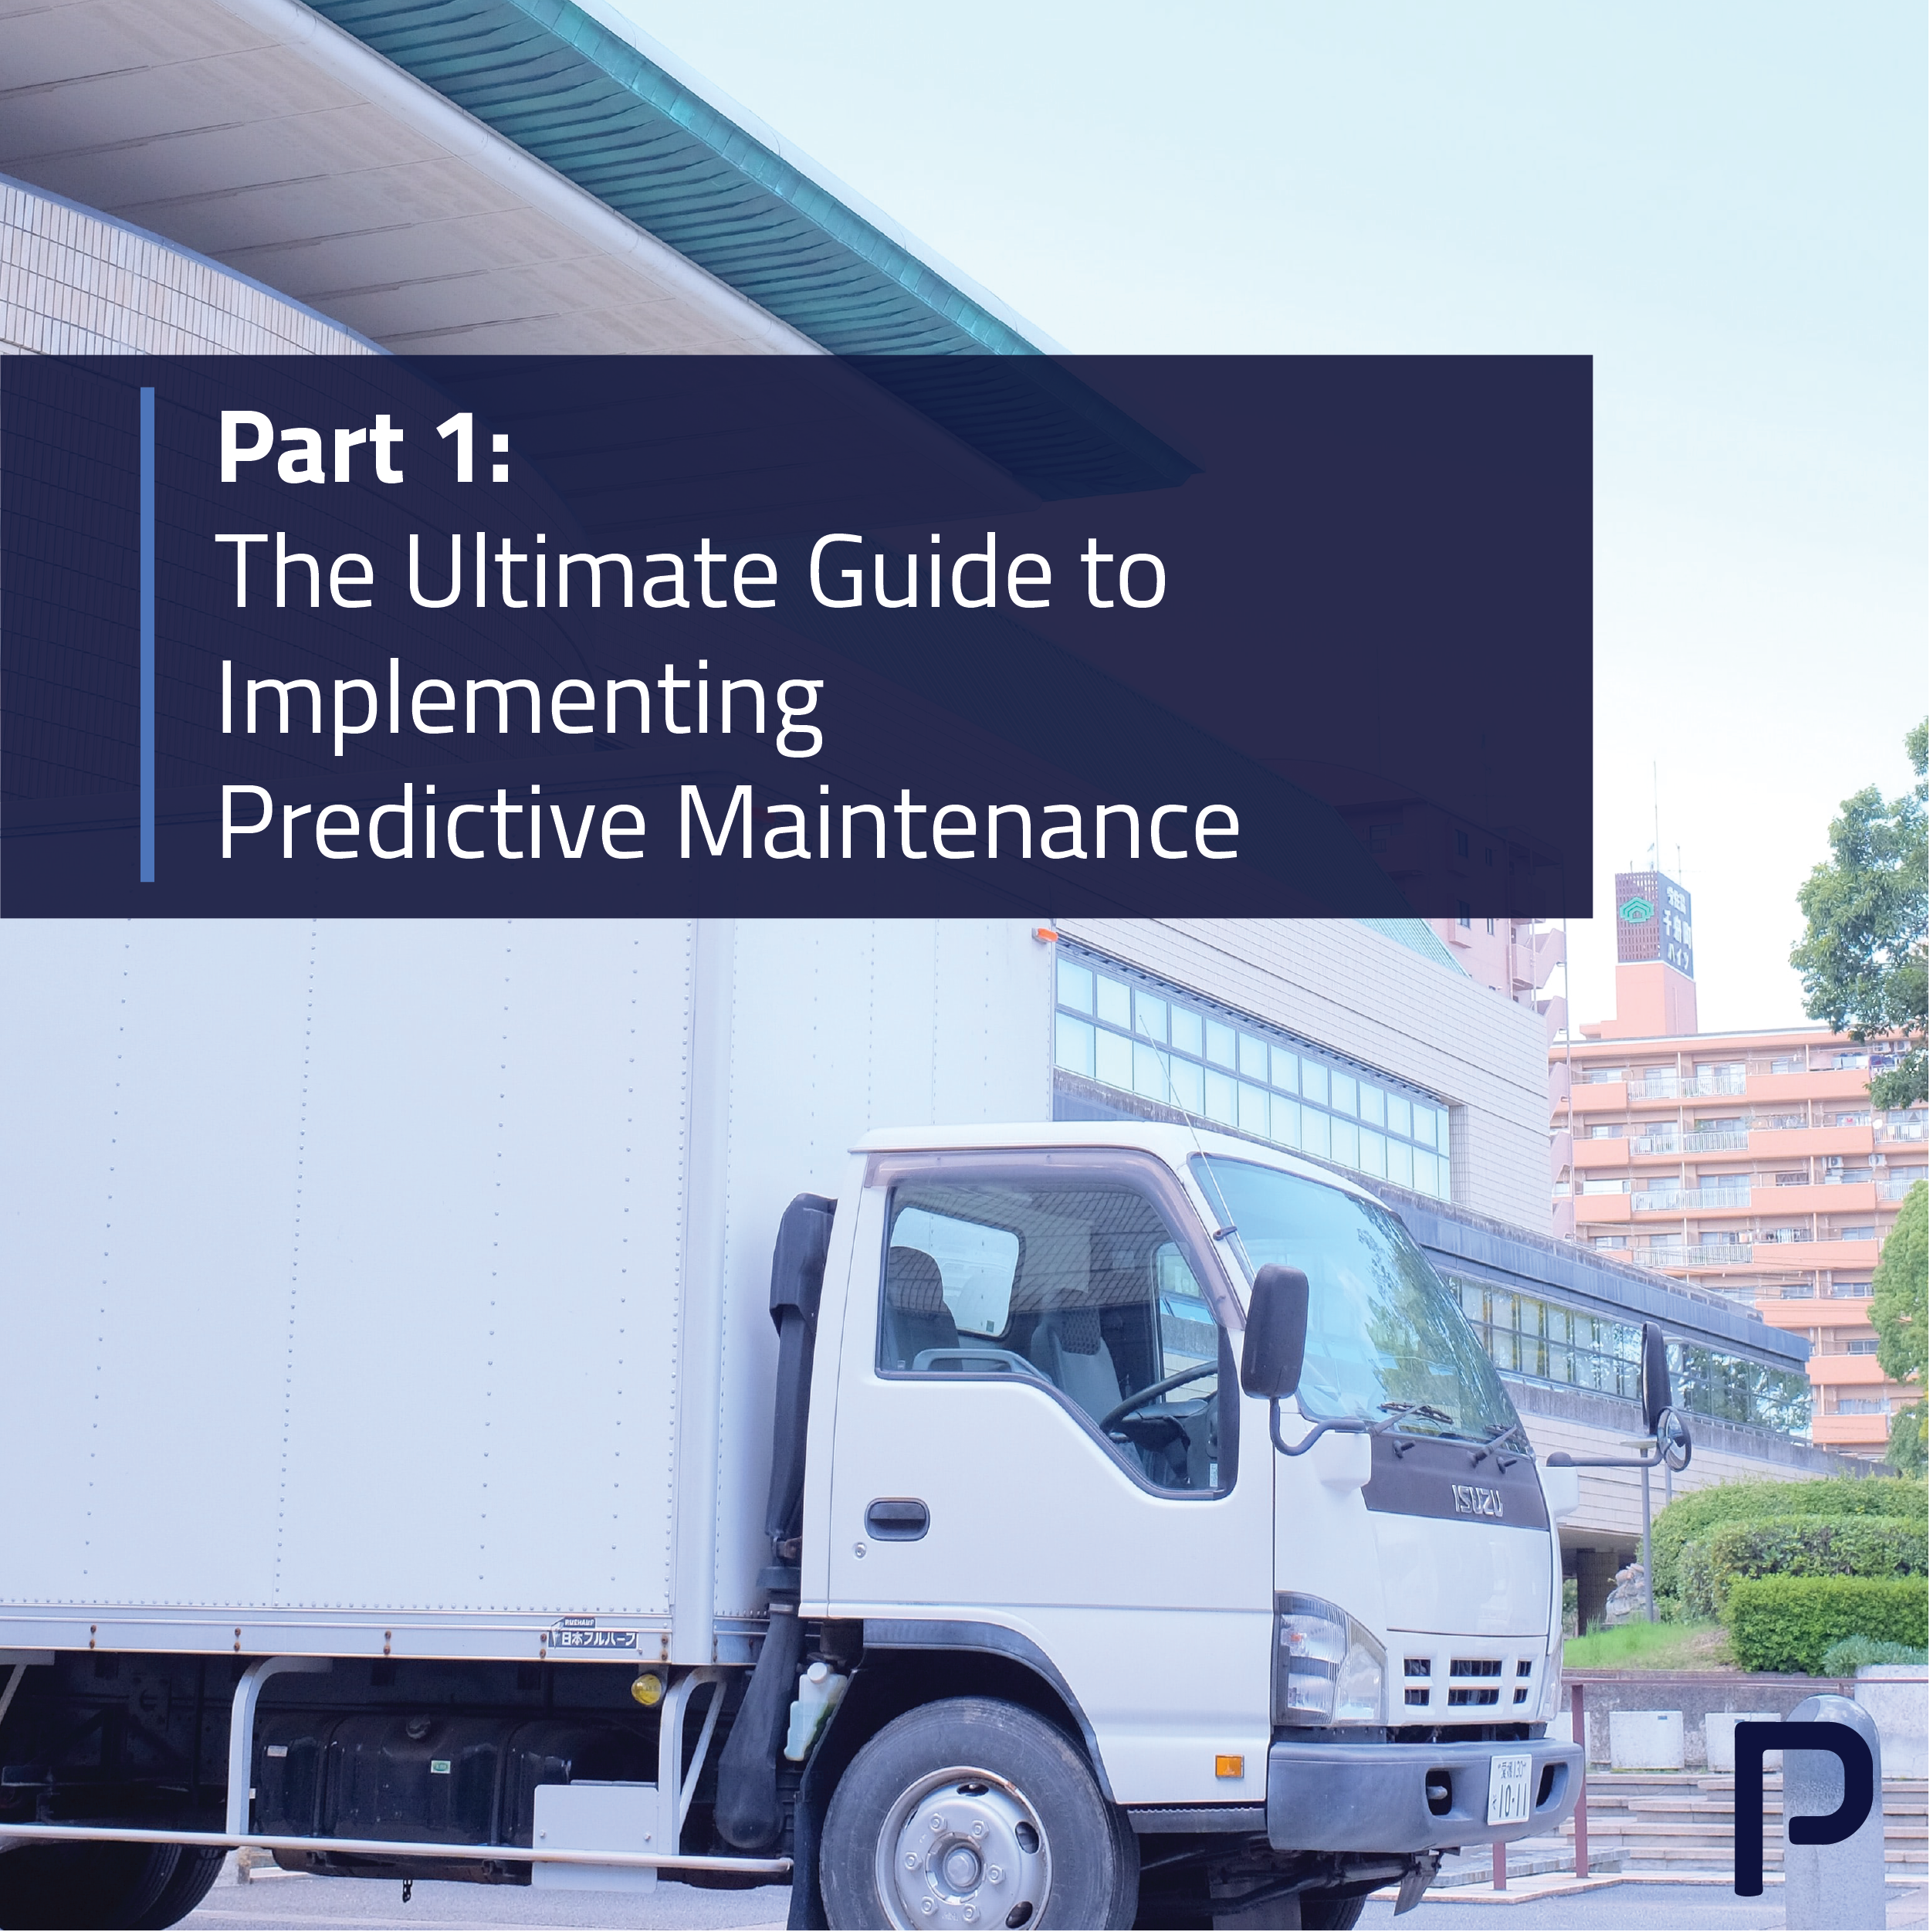 The Ultimate Guide to Implementing Predictive Maintenance – Part 1